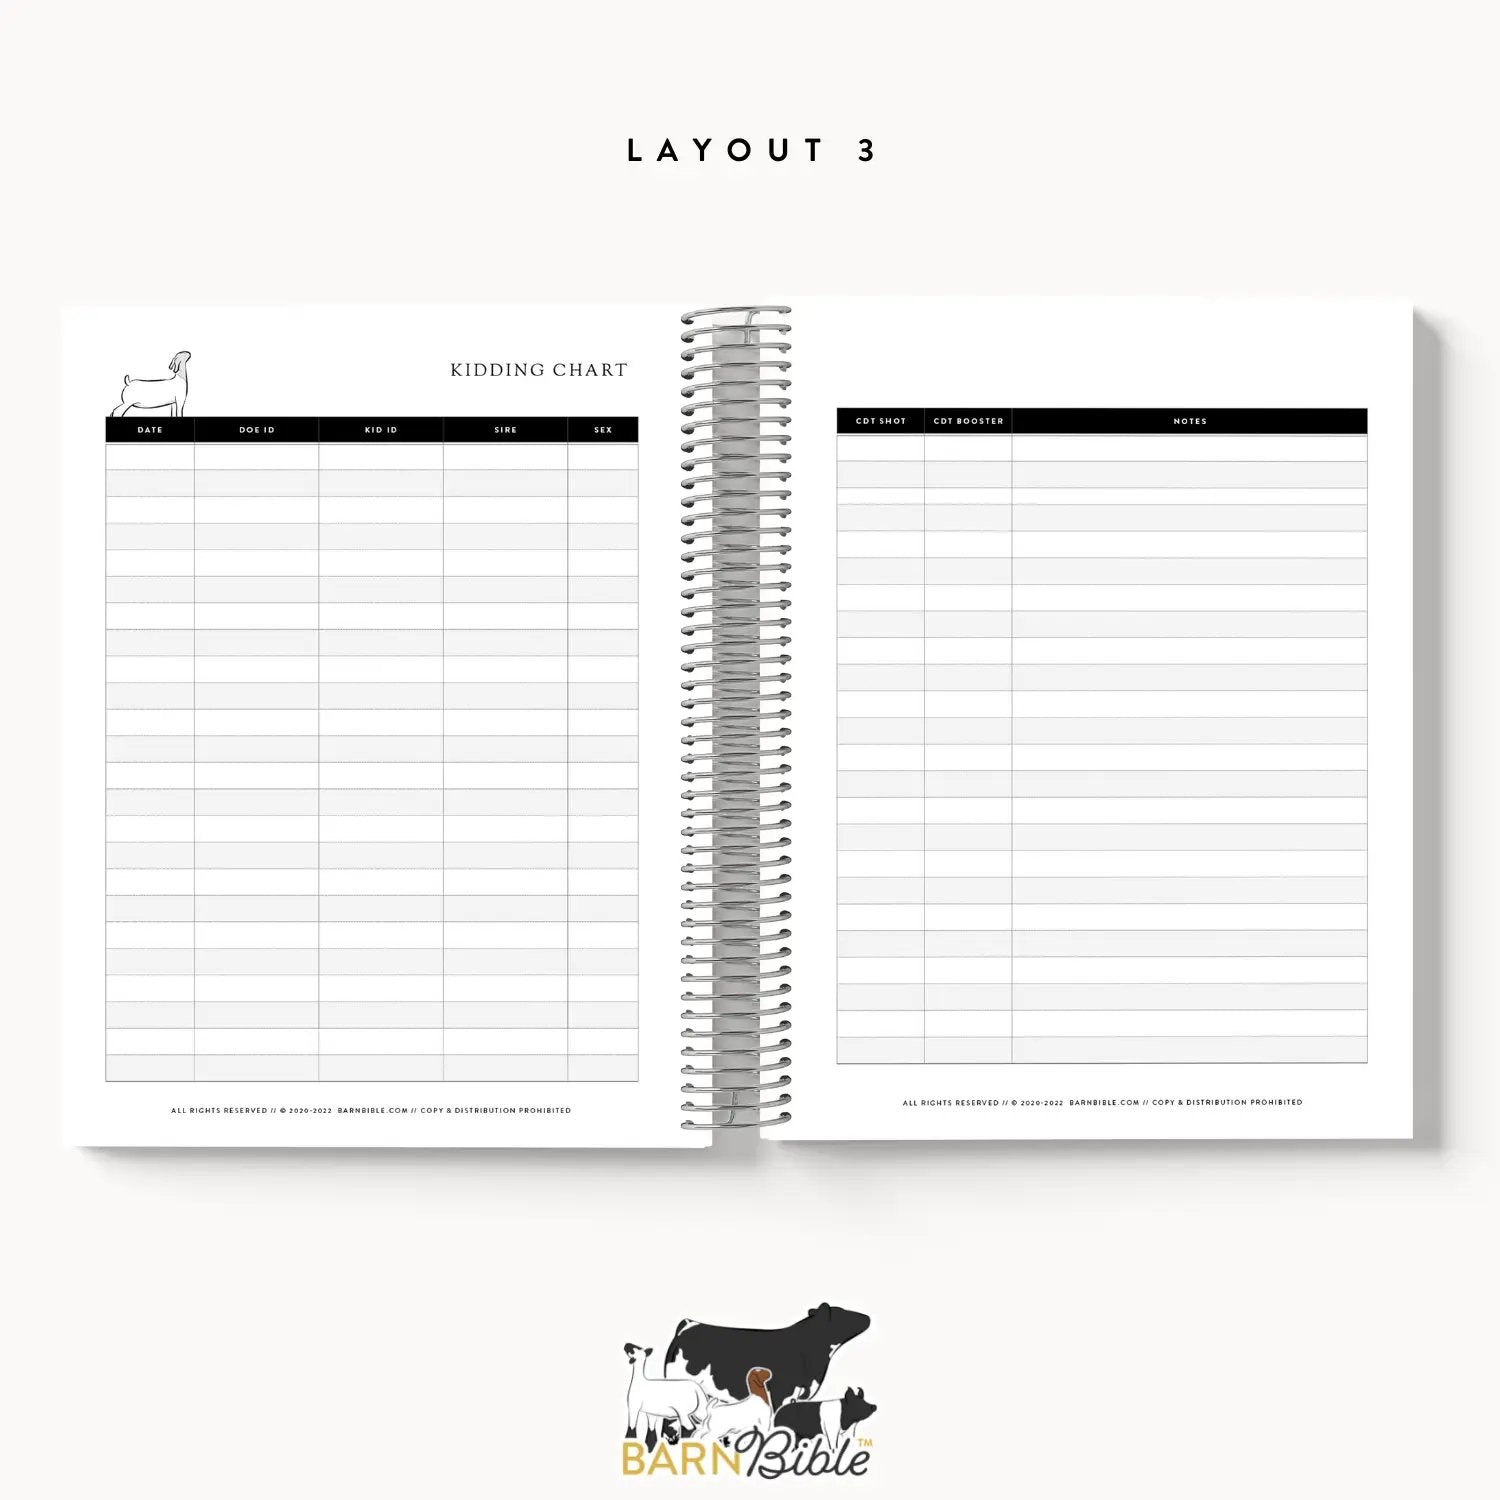 Personalized-Livestock-Kidding Record Planner - Gingham Cover